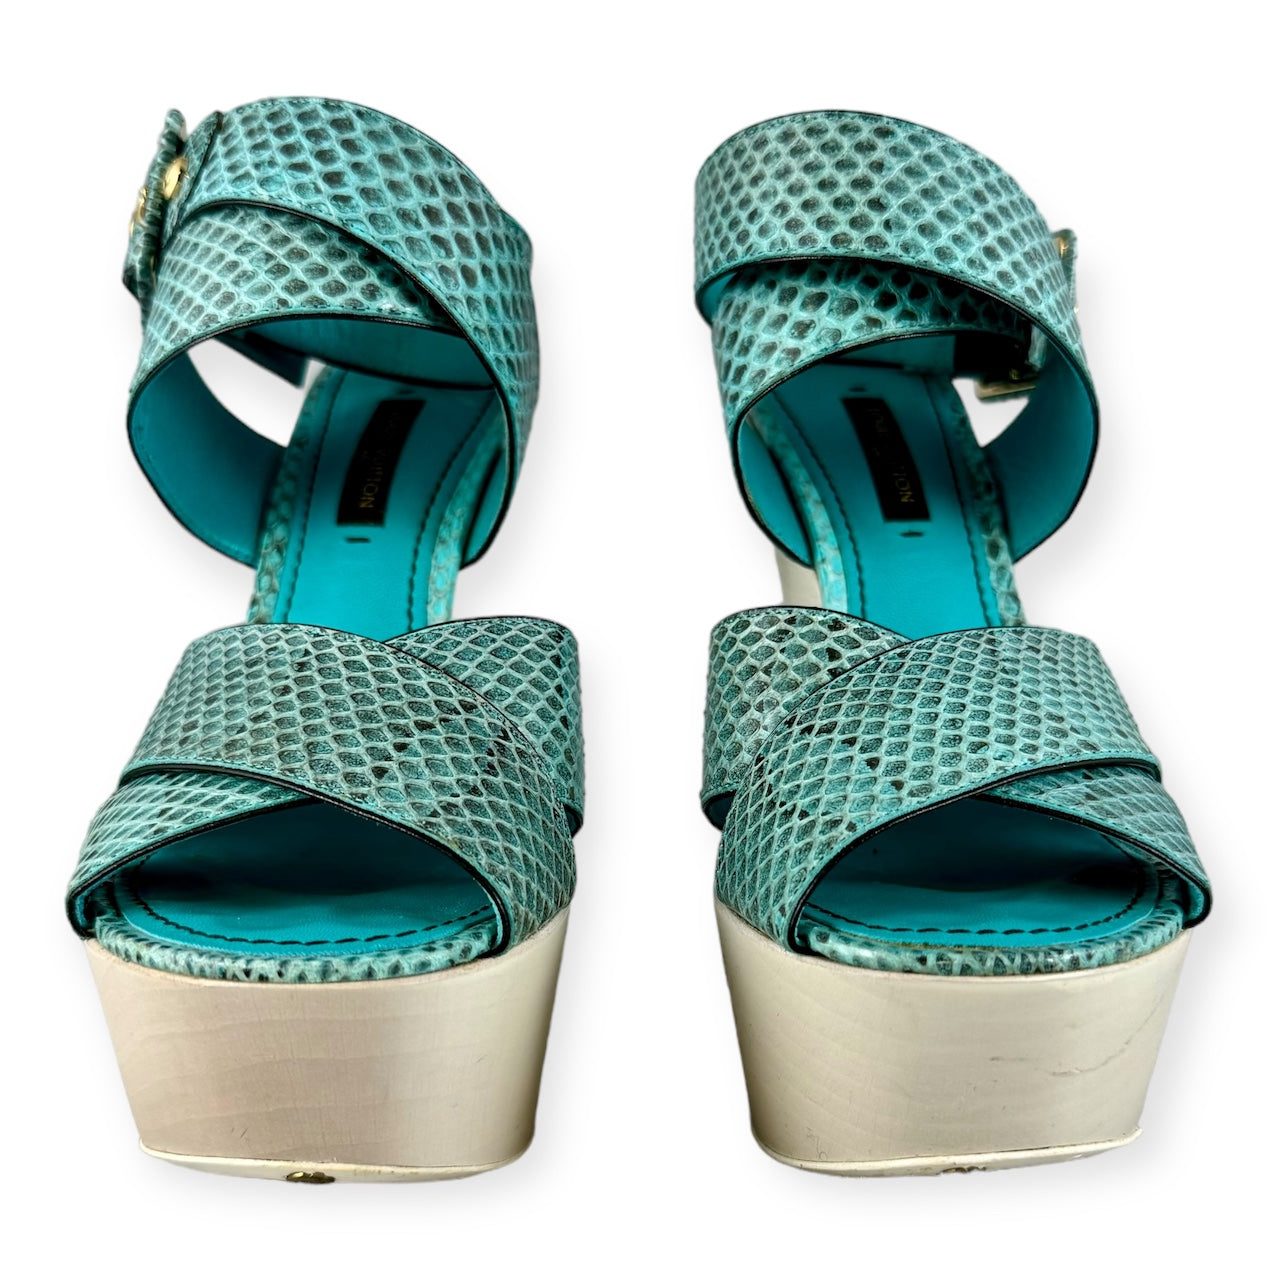 LOUIS VUITTON Snake Wedge Sandals in Turquoise | Size 37.5